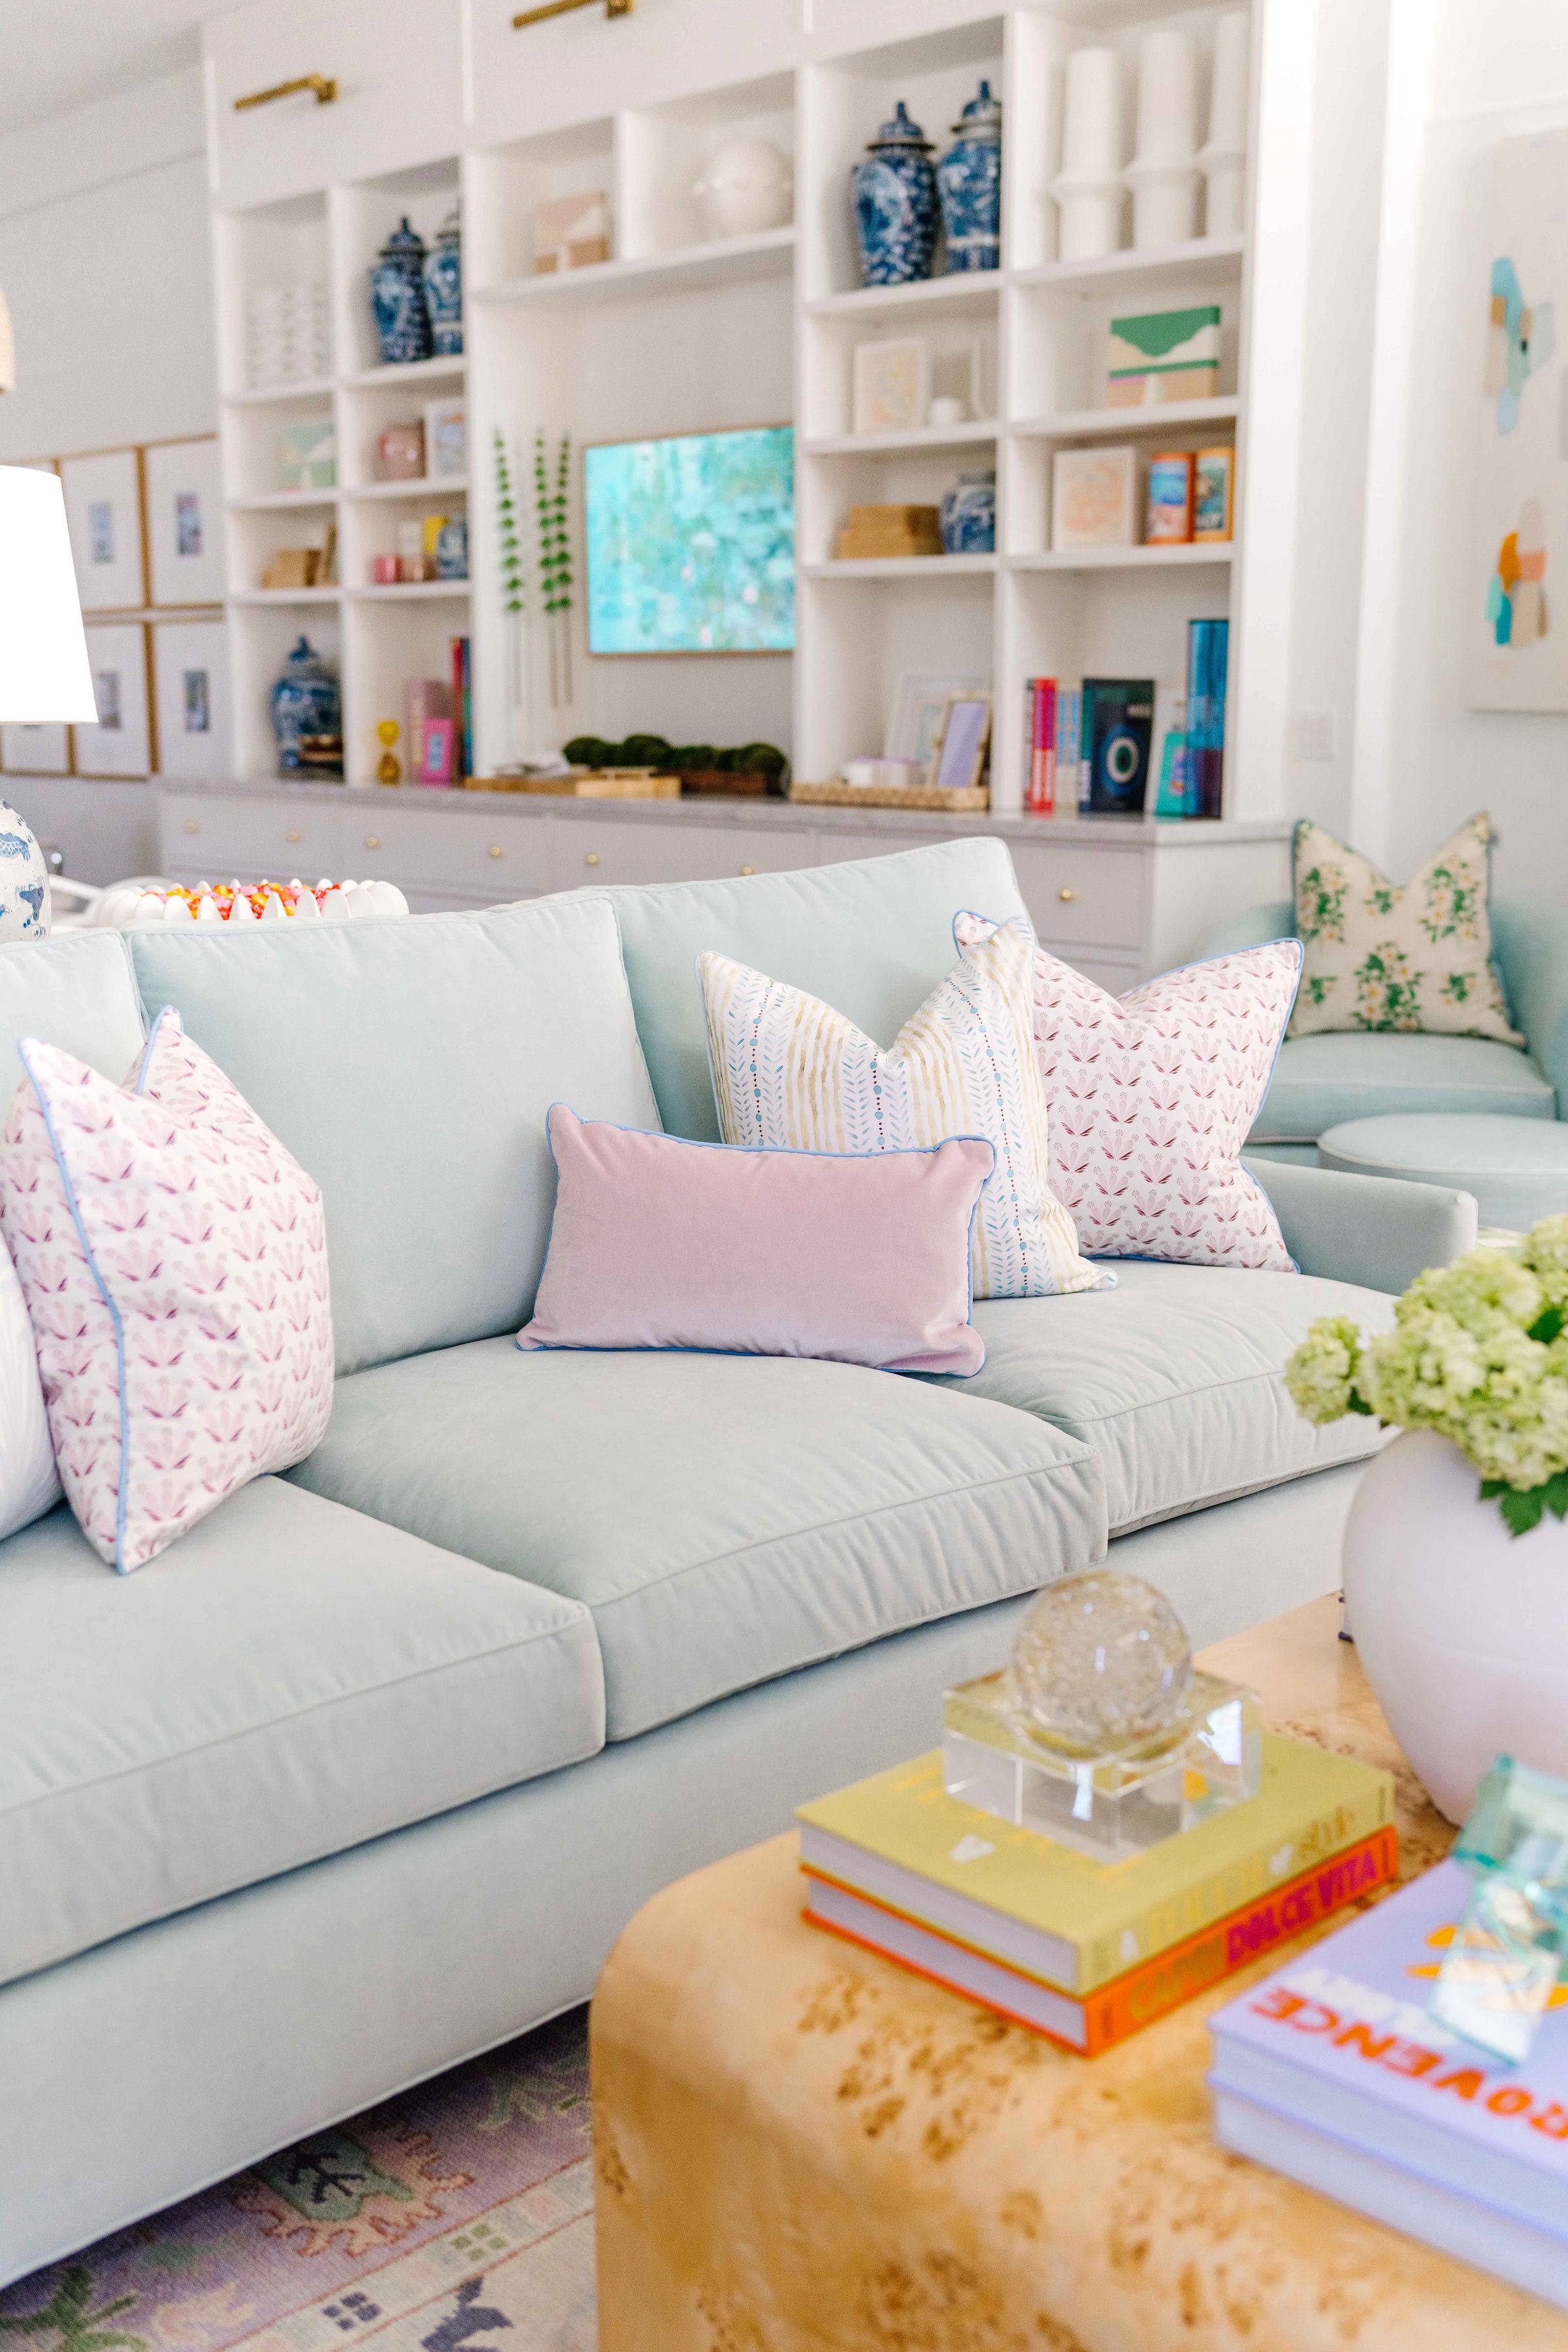 Living room styled with a blue green velvet couch with a Sky Blue Botanical Stripe custom pillow, a Pink & Burgundy Drop Repeat Floral, a Blue & Green Striped custom pillow, and a pink velvet custom lumbar pillow in front of a coffee table